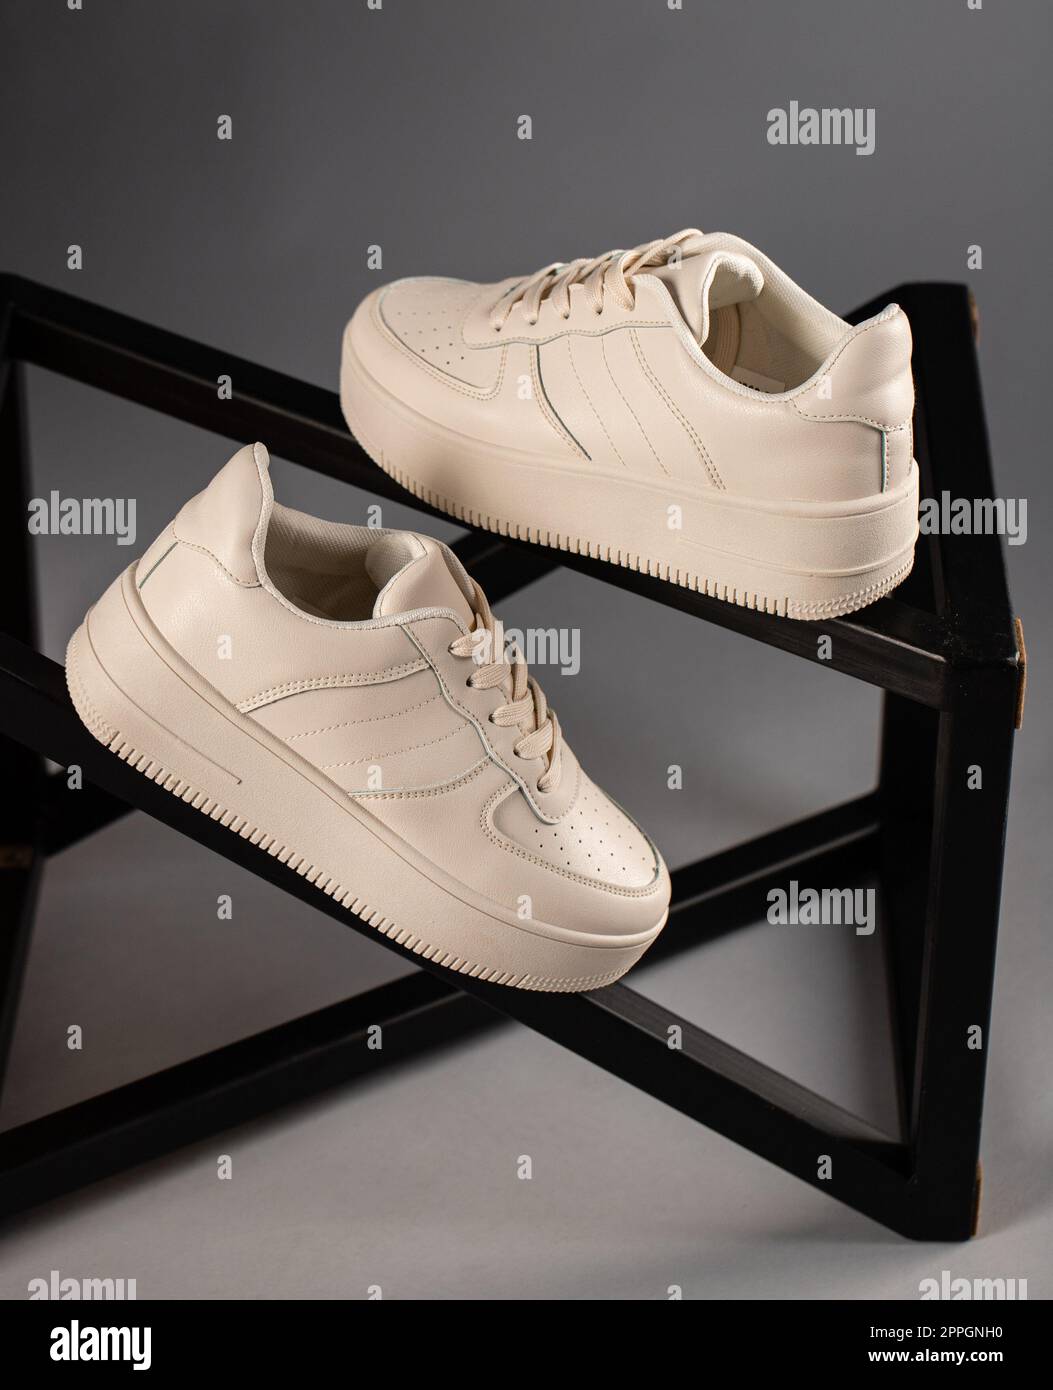 Pair of stylish white women's sneakers standing on metal structure on gray background. Stock Photo